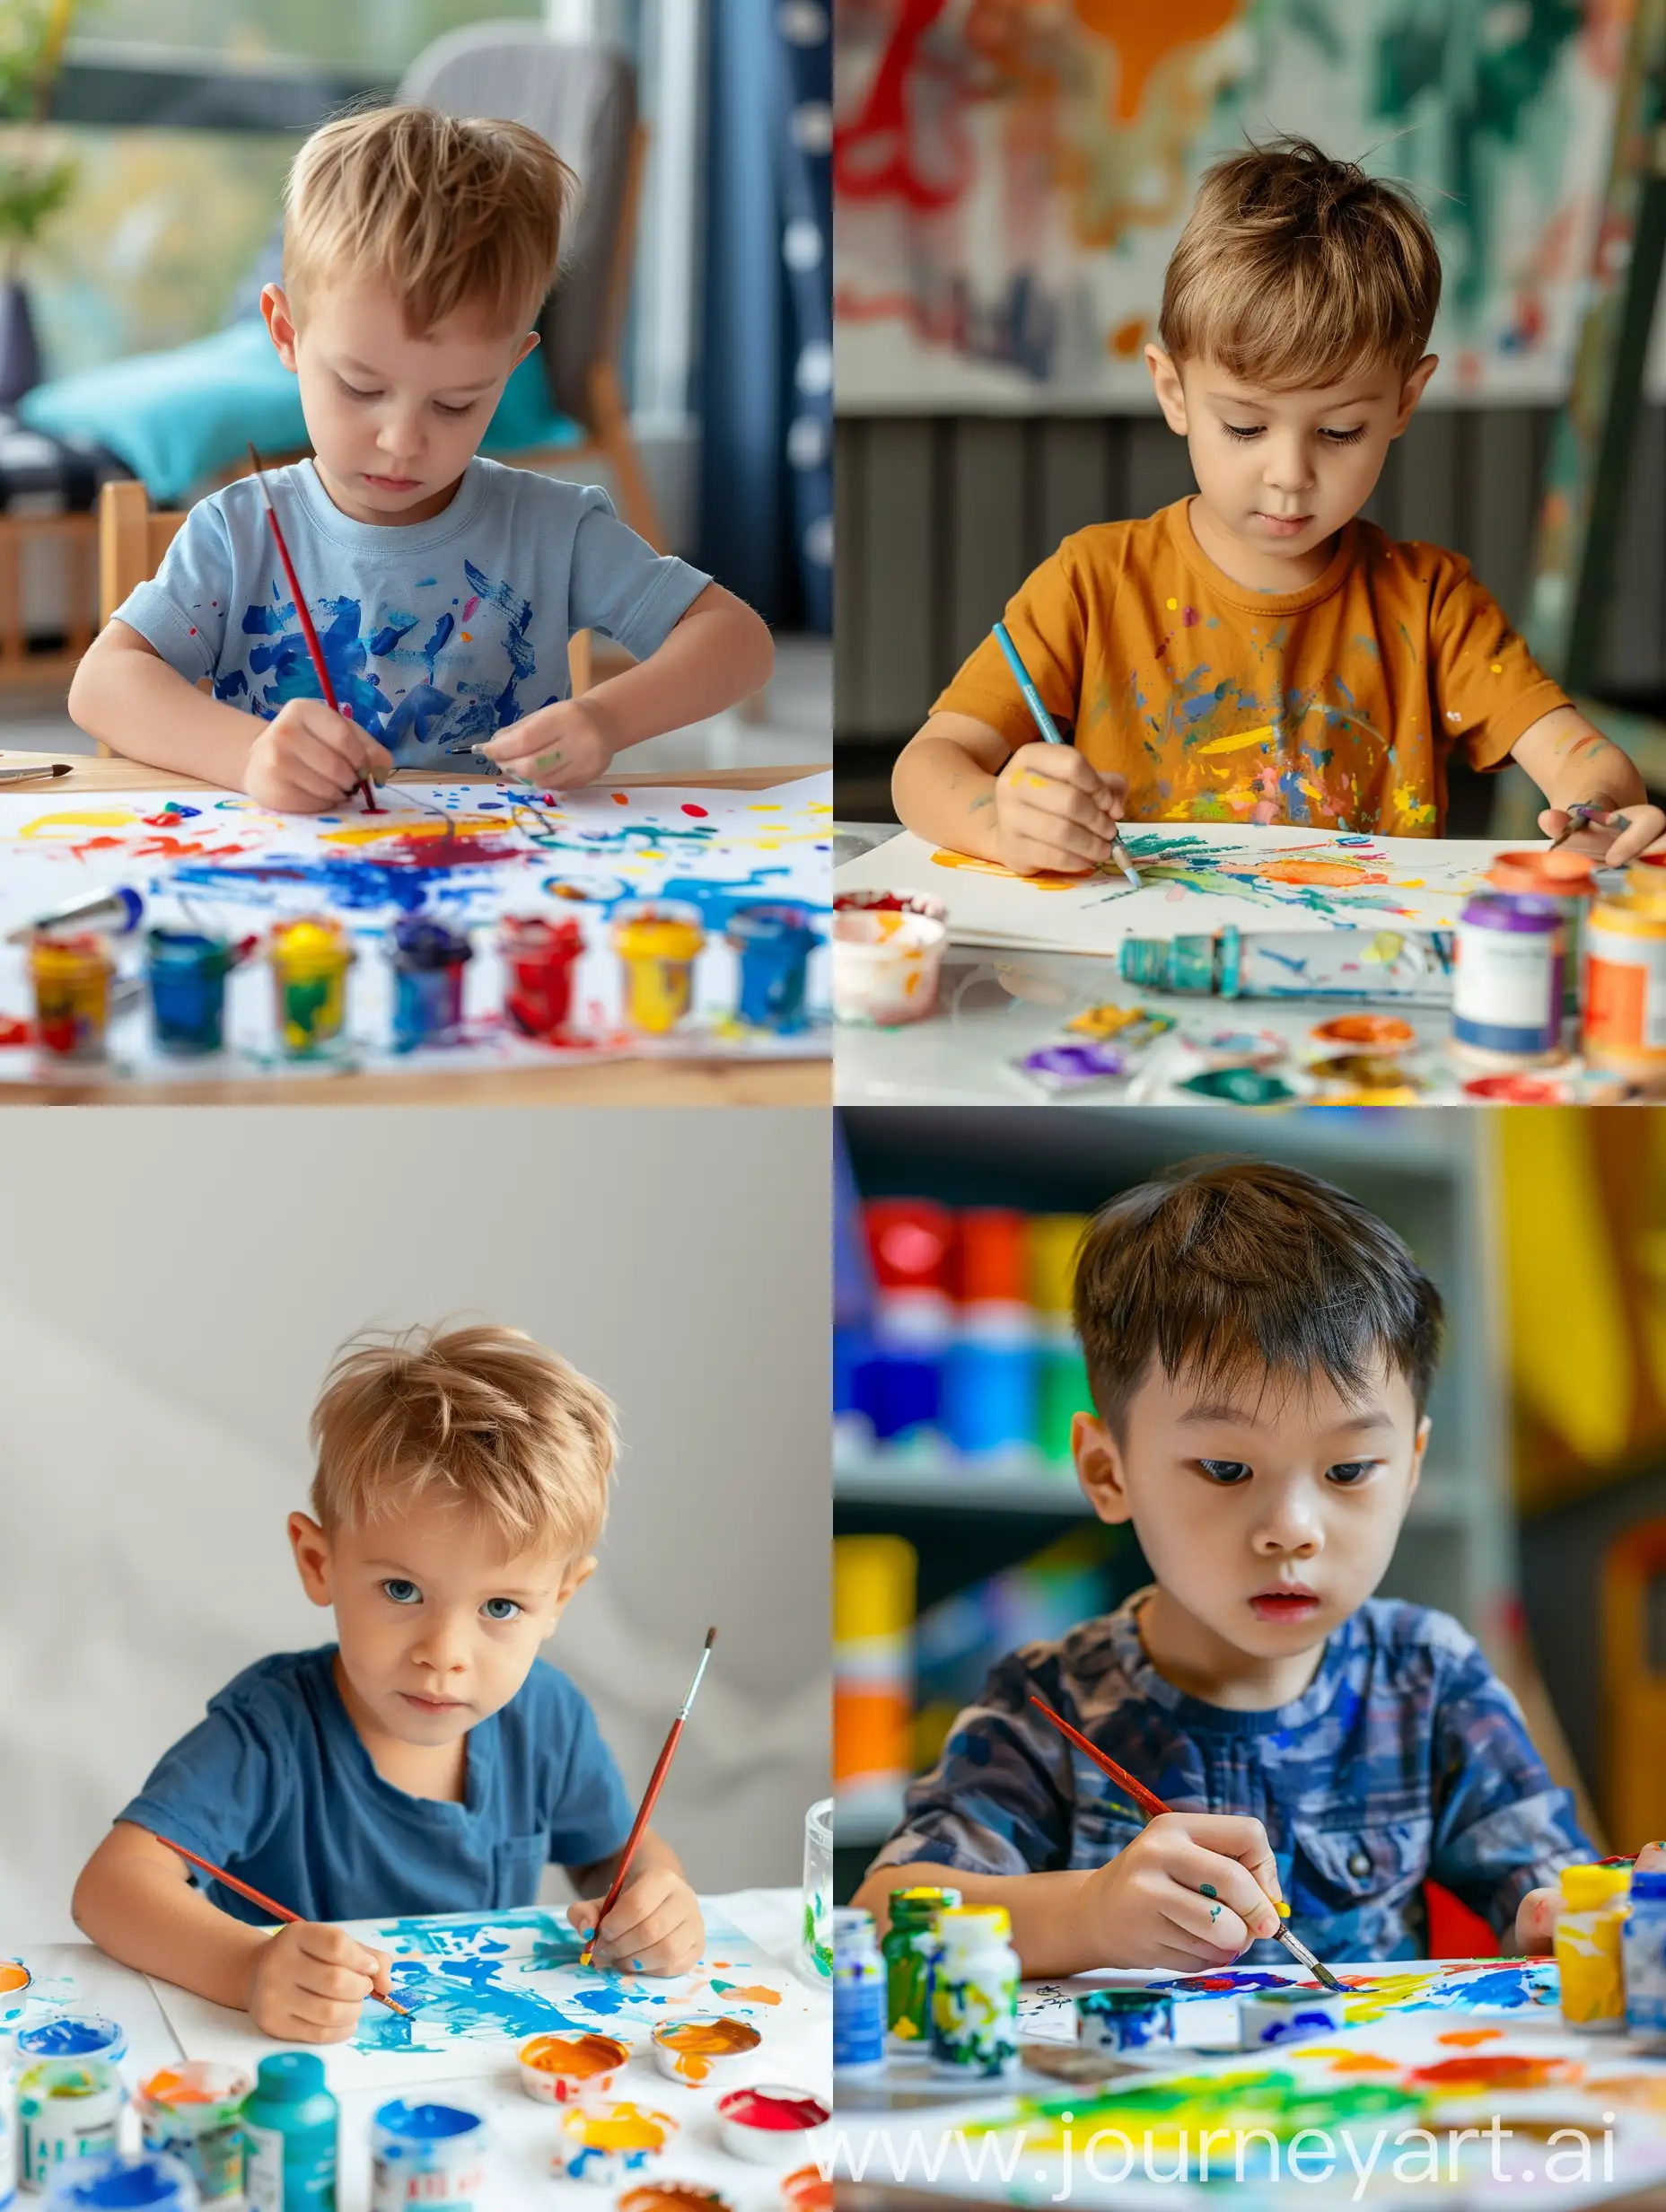 Creative-Little-Boy-Painting-with-Vibrant-Colors-on-Paper